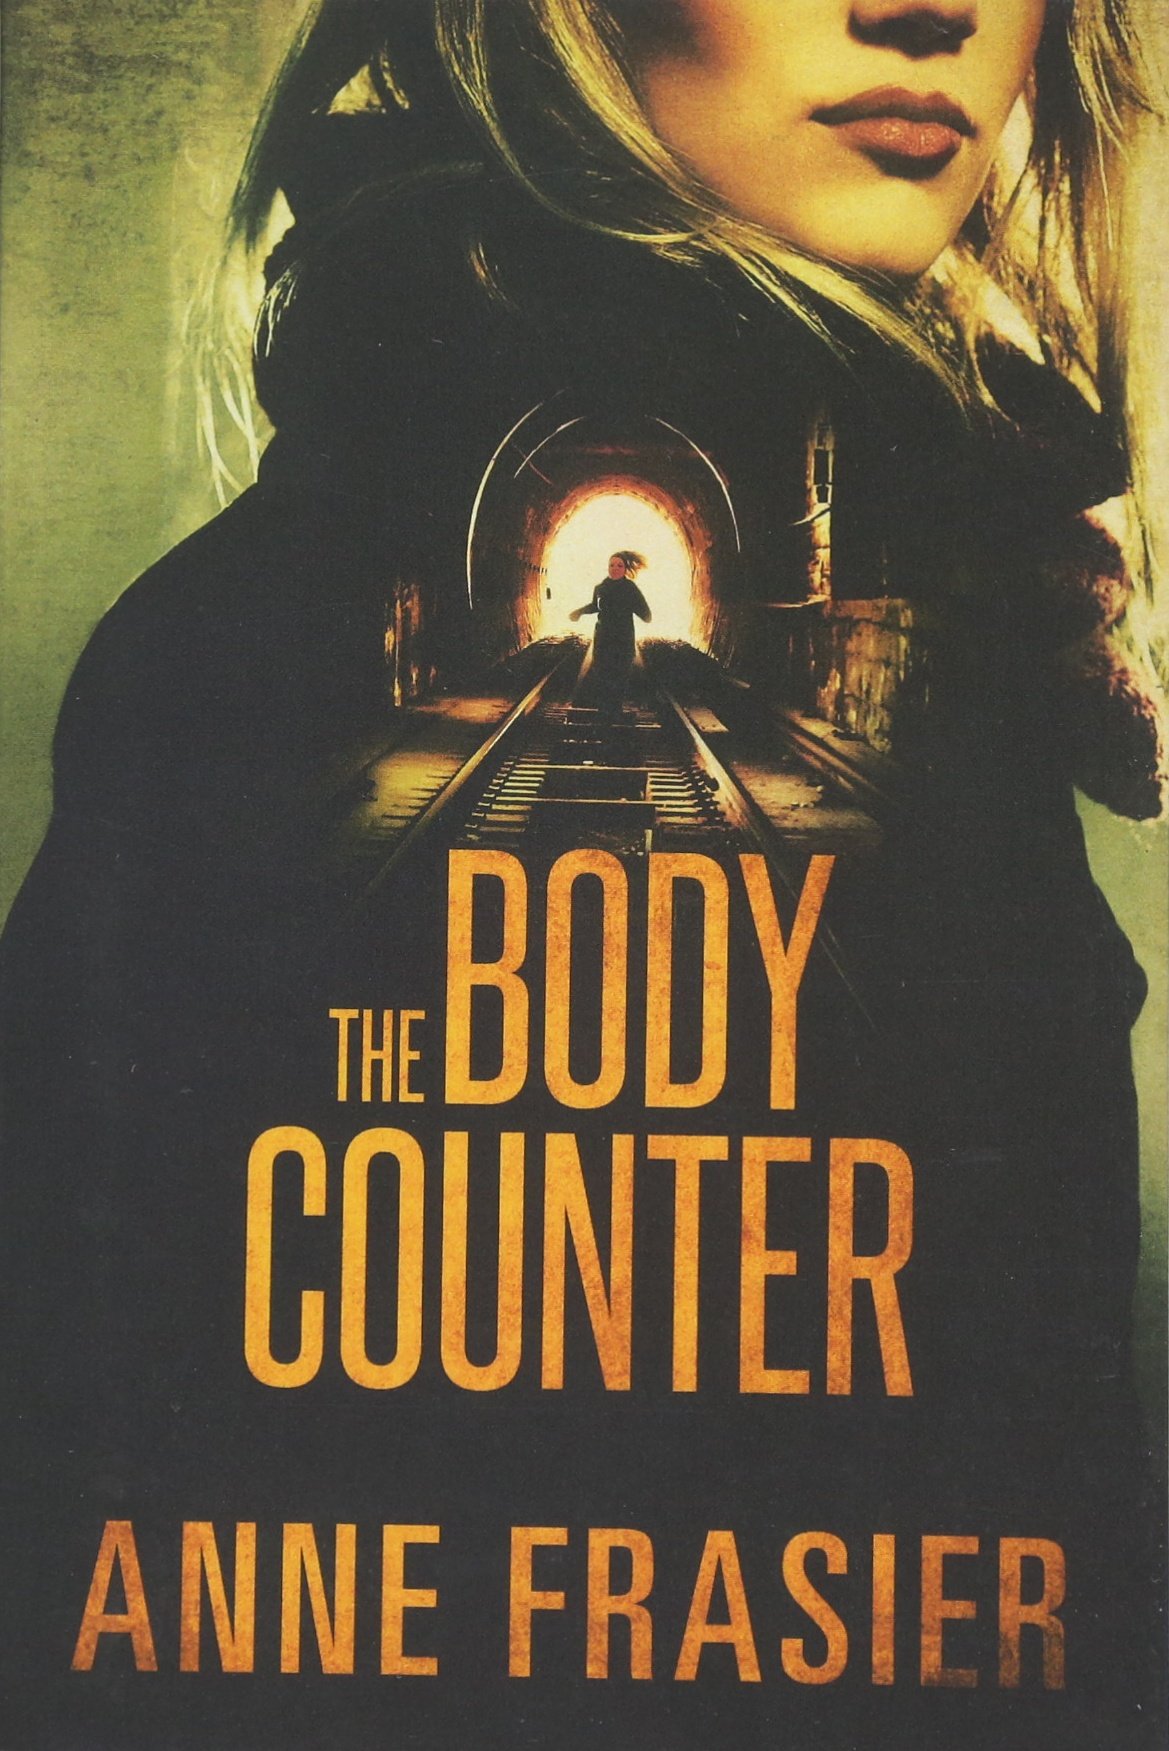 Book 150 – The Body Counter by Anne Frasier